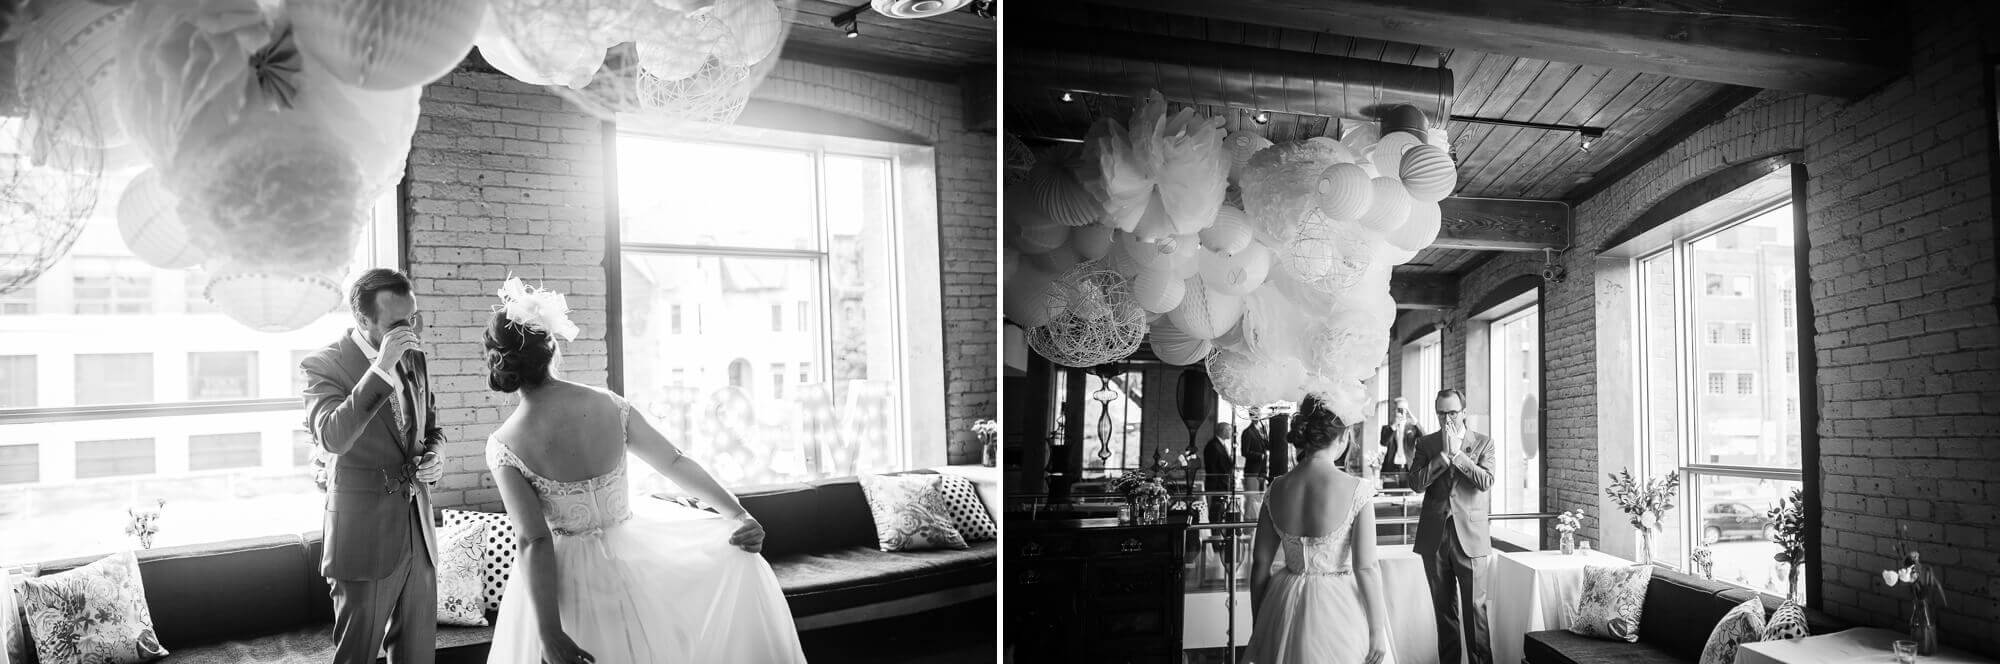 Black and white portraits of the groom wiping his eyes at the sight of his bride at Hotel Ocho, Toronto